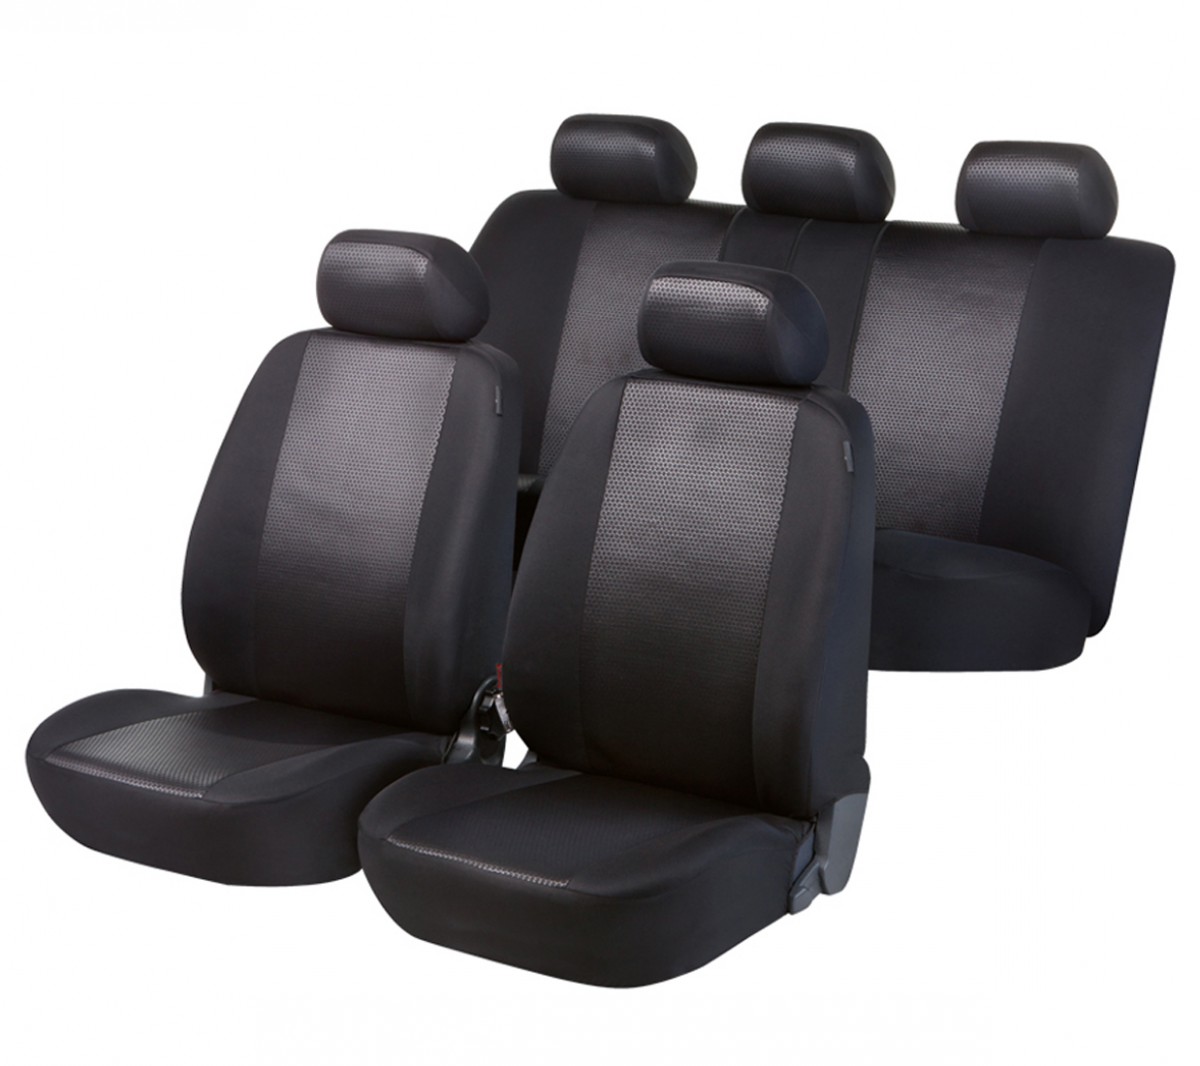 Kia Sportage, seat covers, black, complete set | carseatcovers24.co.uk